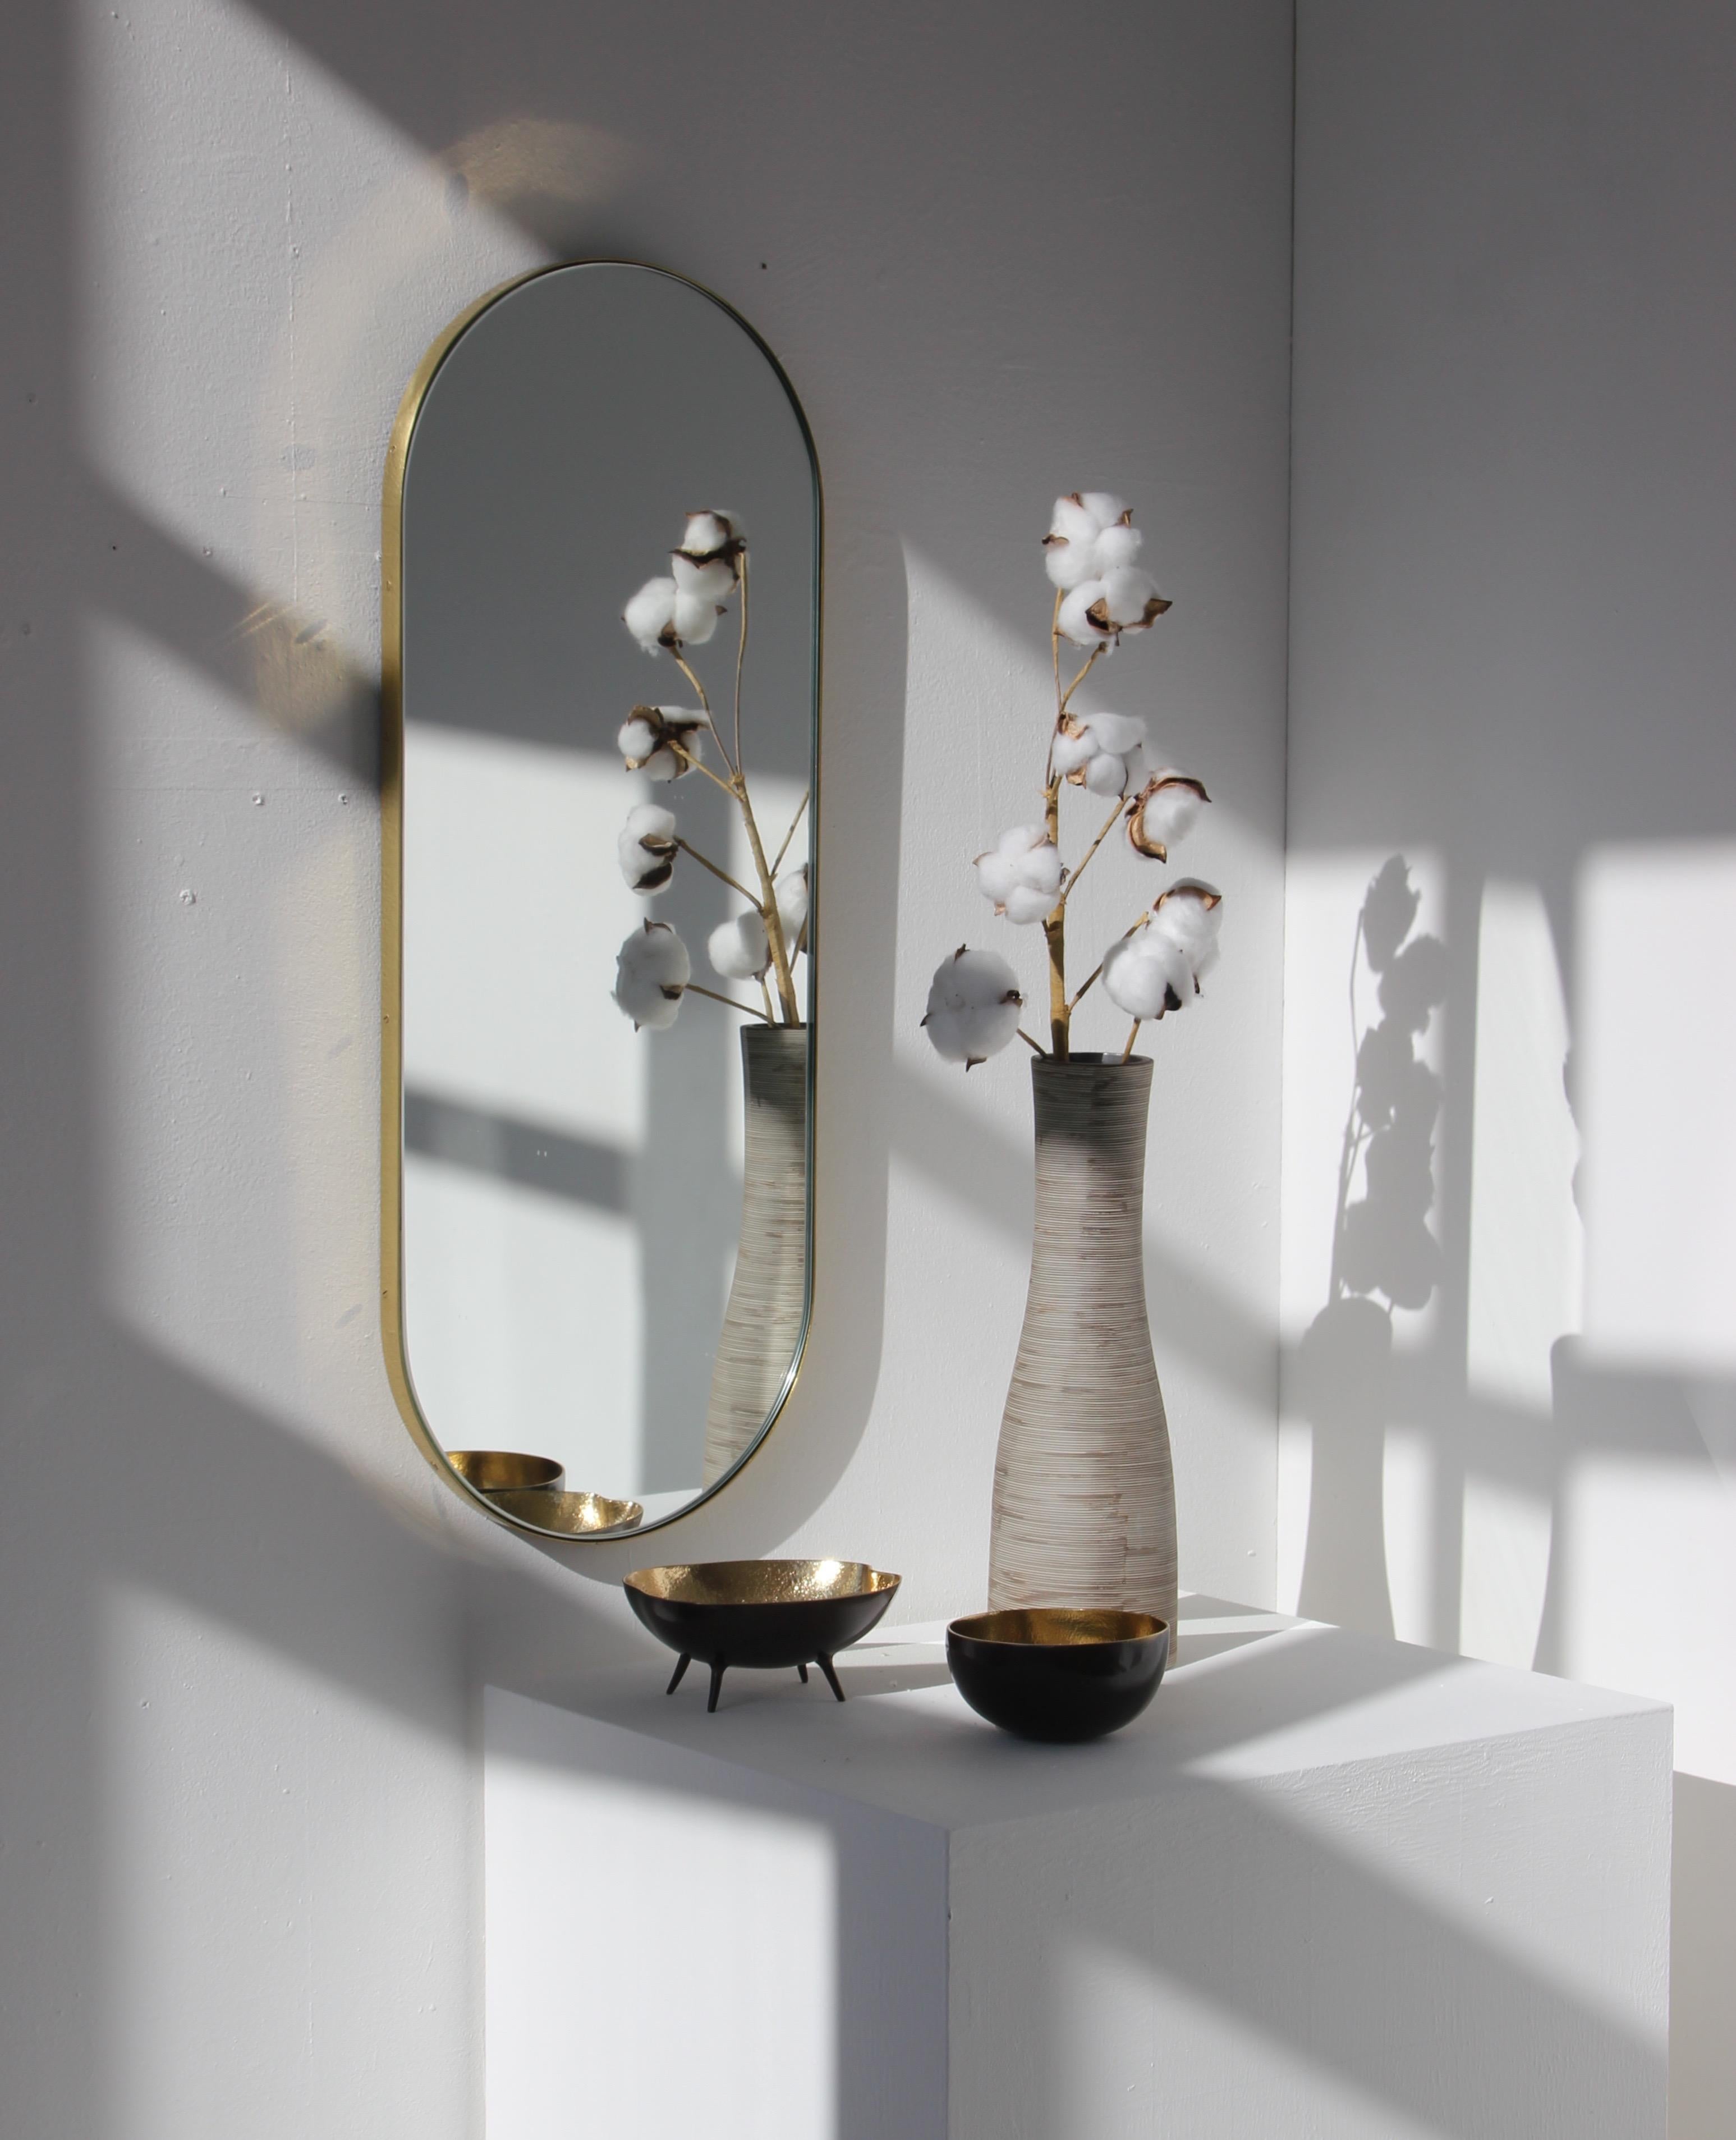 Modern capsule shaped mirror with a minimalist solid brushed brass frame. Designed and handcrafted in London, UK.

Our mirrors are designed with an integrated French cleat (split batten) system that ensures the mirror is securely mounted flush with